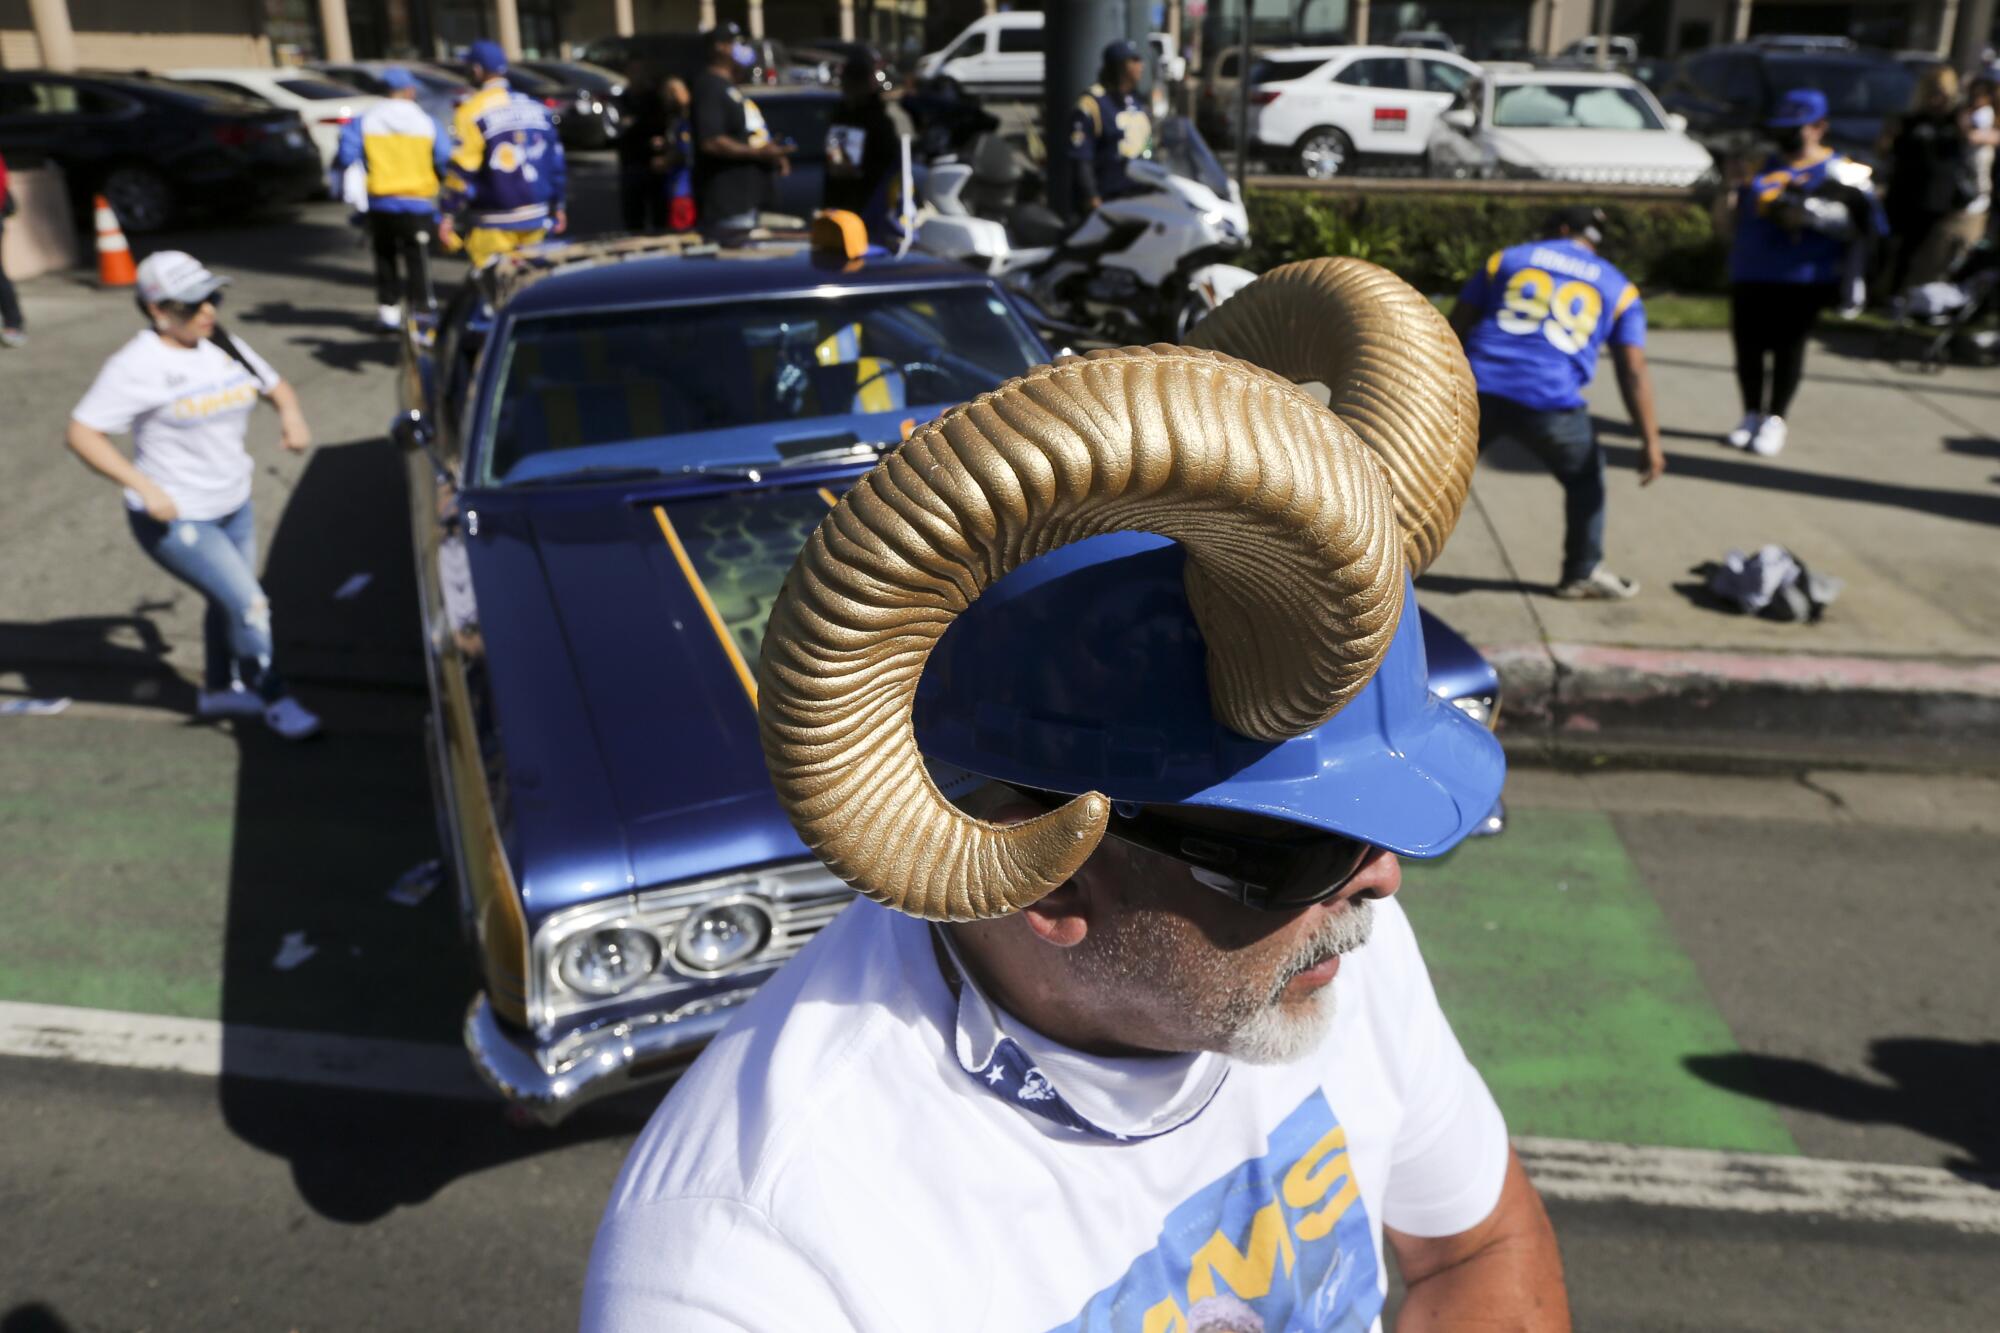 Rams fans gather for the Super Bowl victory parade in Los Angeles.